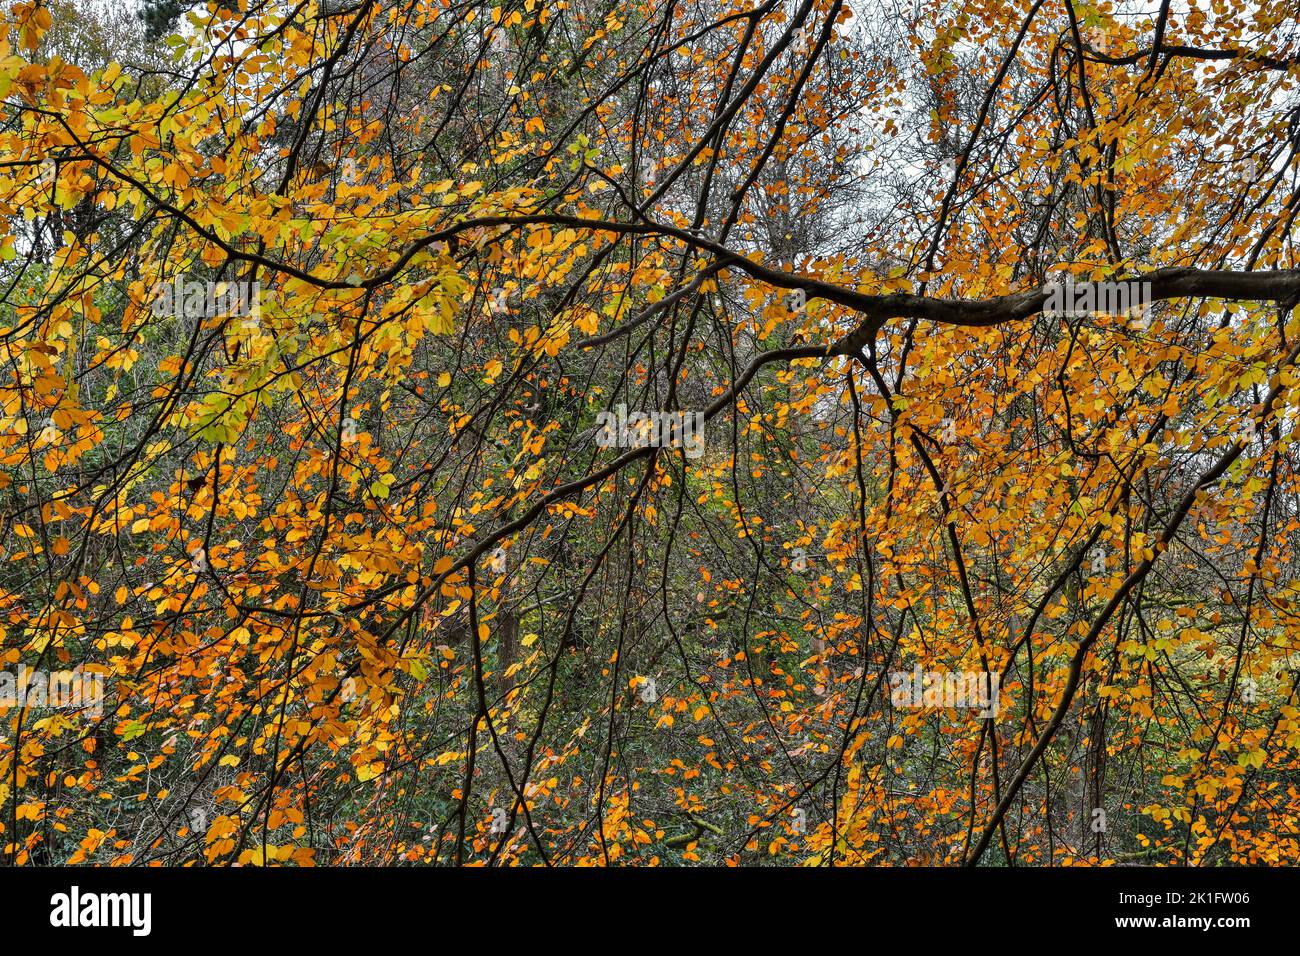 Beech leaves on branches in Autumn in vivid yellows and orange colours Stock Photo